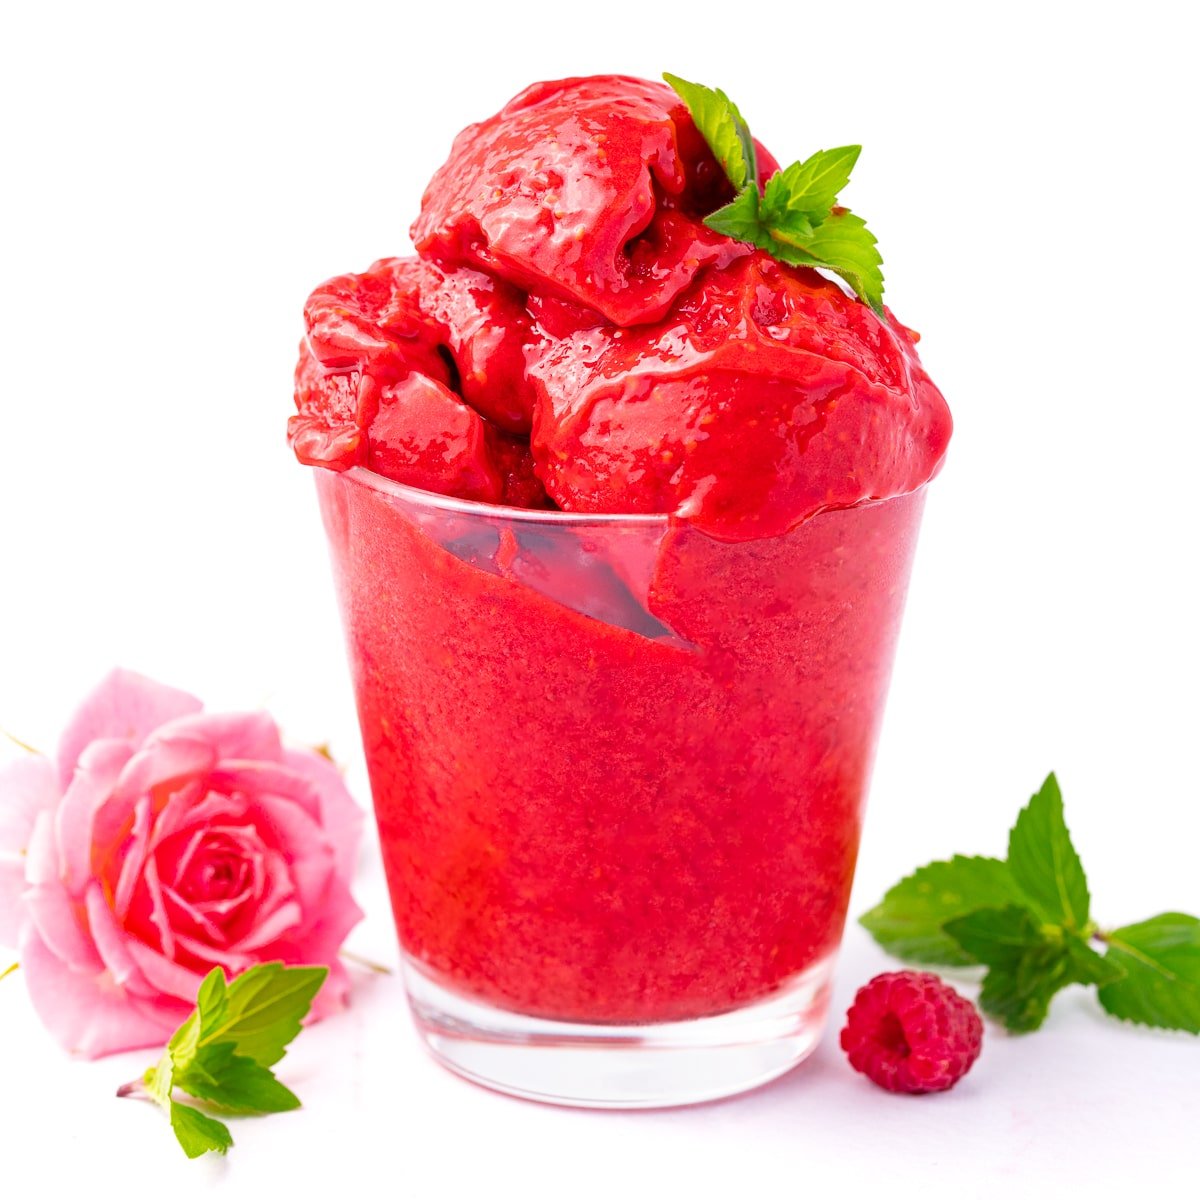 a glass of no churn raspberry sorbet garnished with a piece of mint